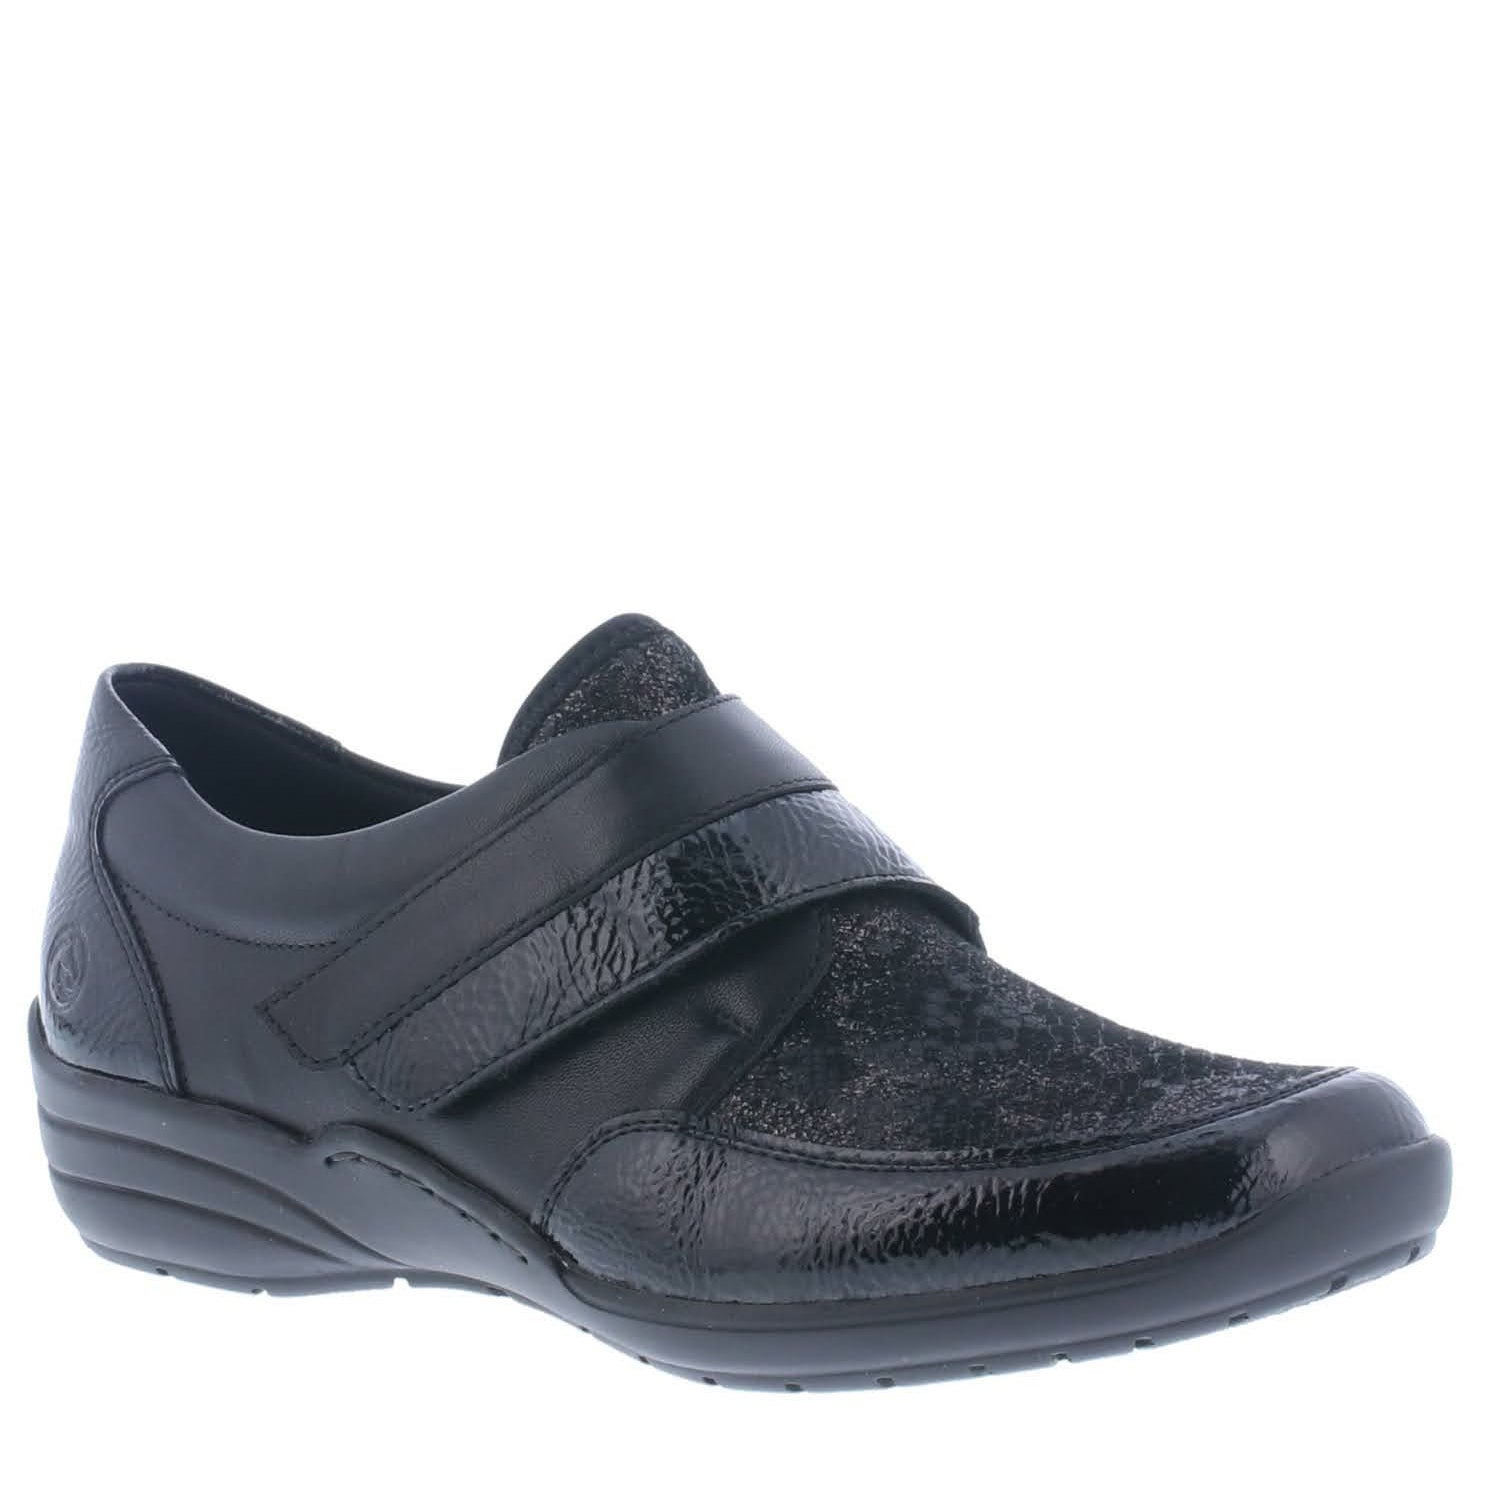 Shop R7600 - BLACK LEATHER by REMONTE - Ian's Shoes for Women